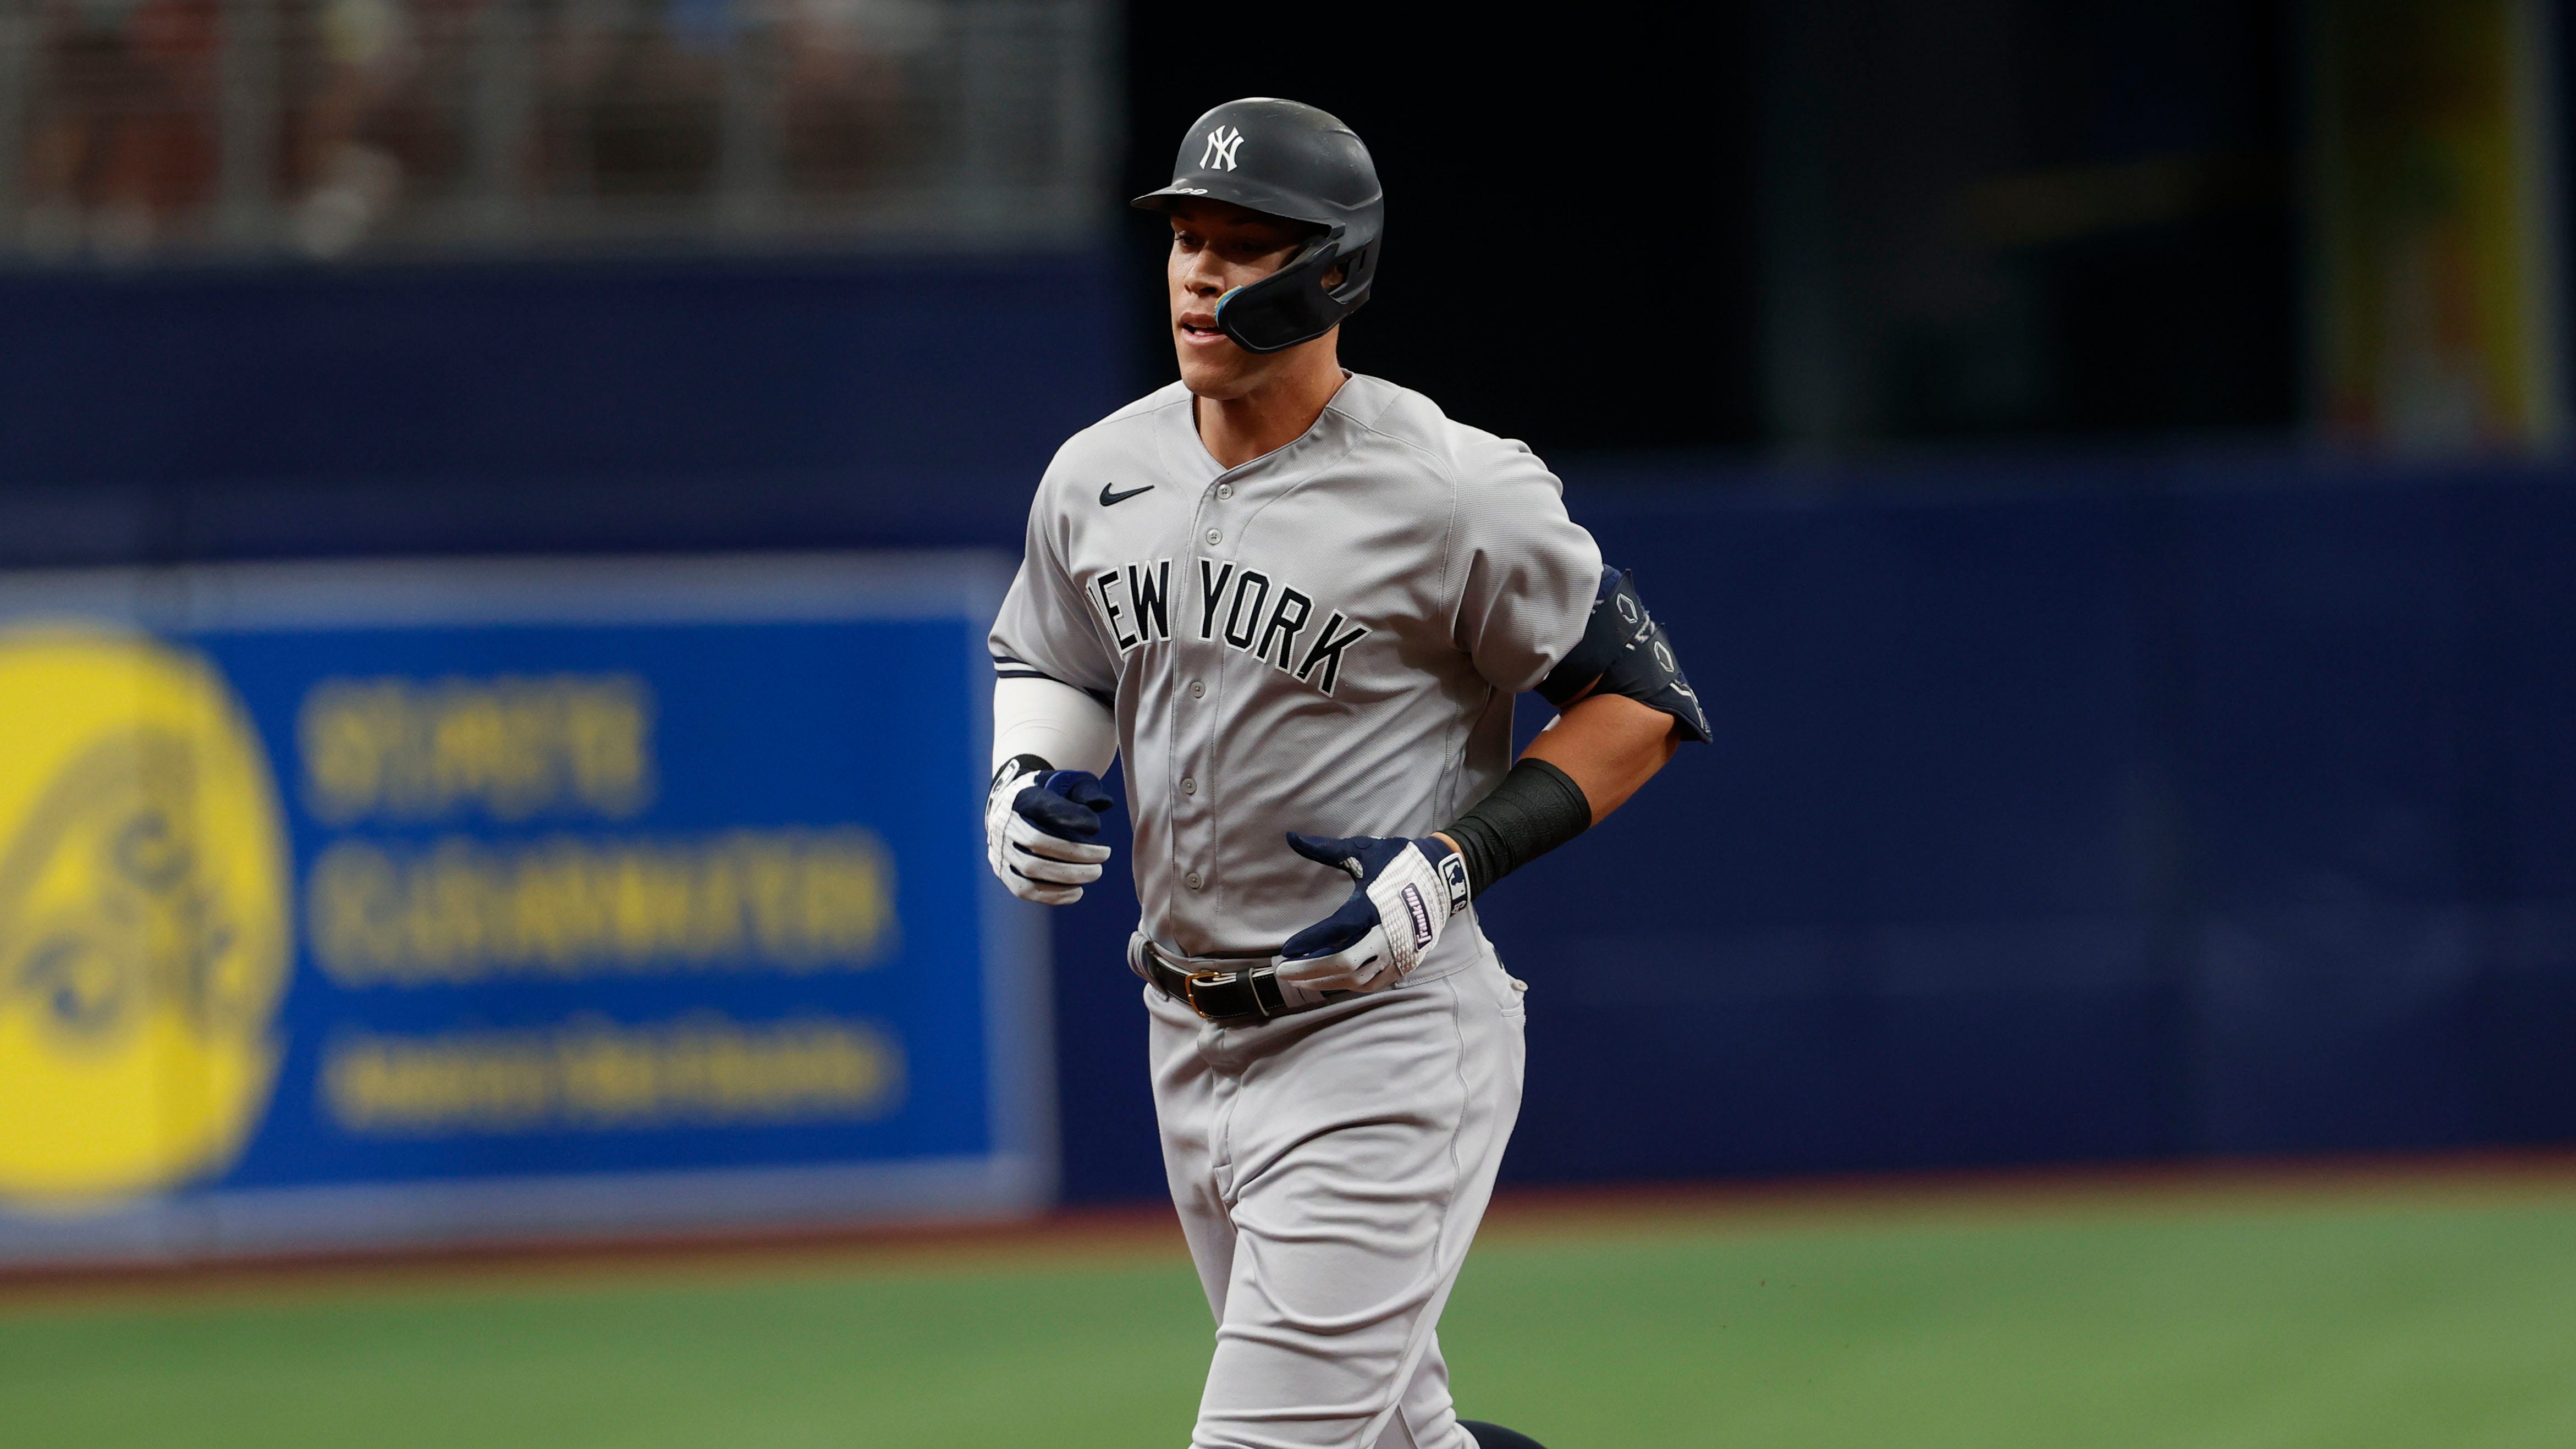 Yankees Ticket Sales Soaring Amid Aaron Judge's Record Chase